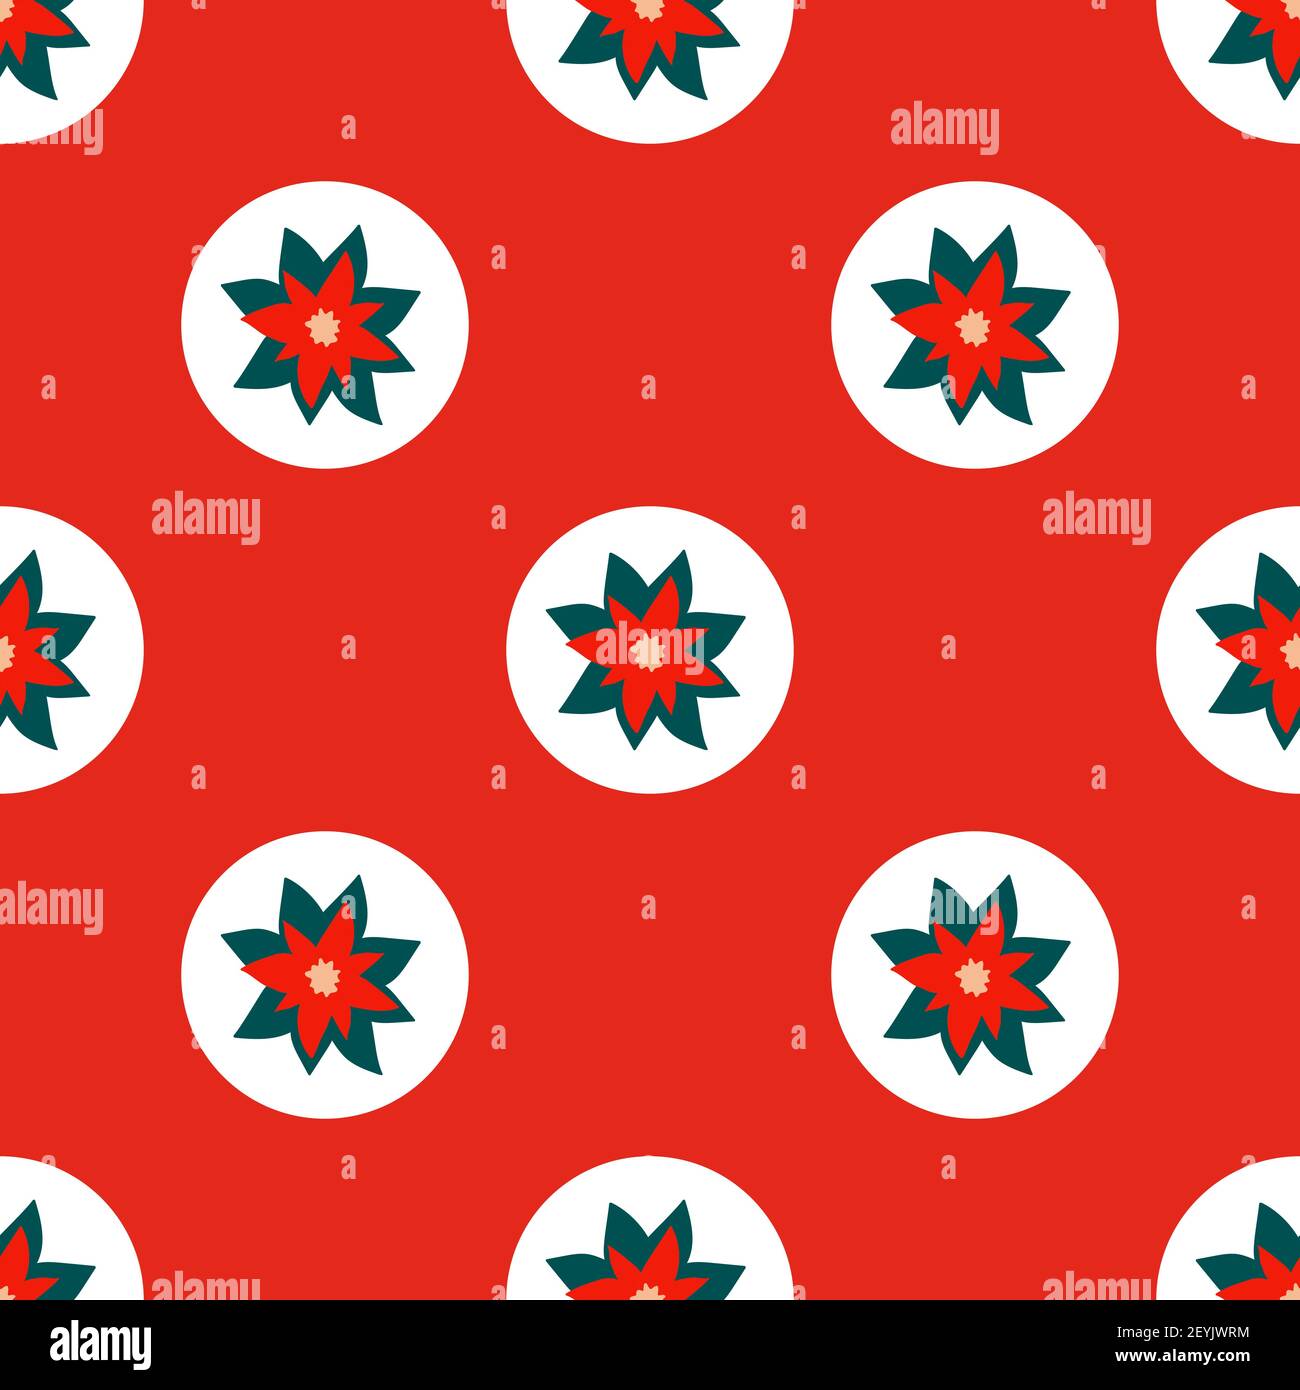 Bright red seamless Christmas pattern of repeating elements - white circles with poinsettia in the center. Vector illustration in a festive style. Stock Vector